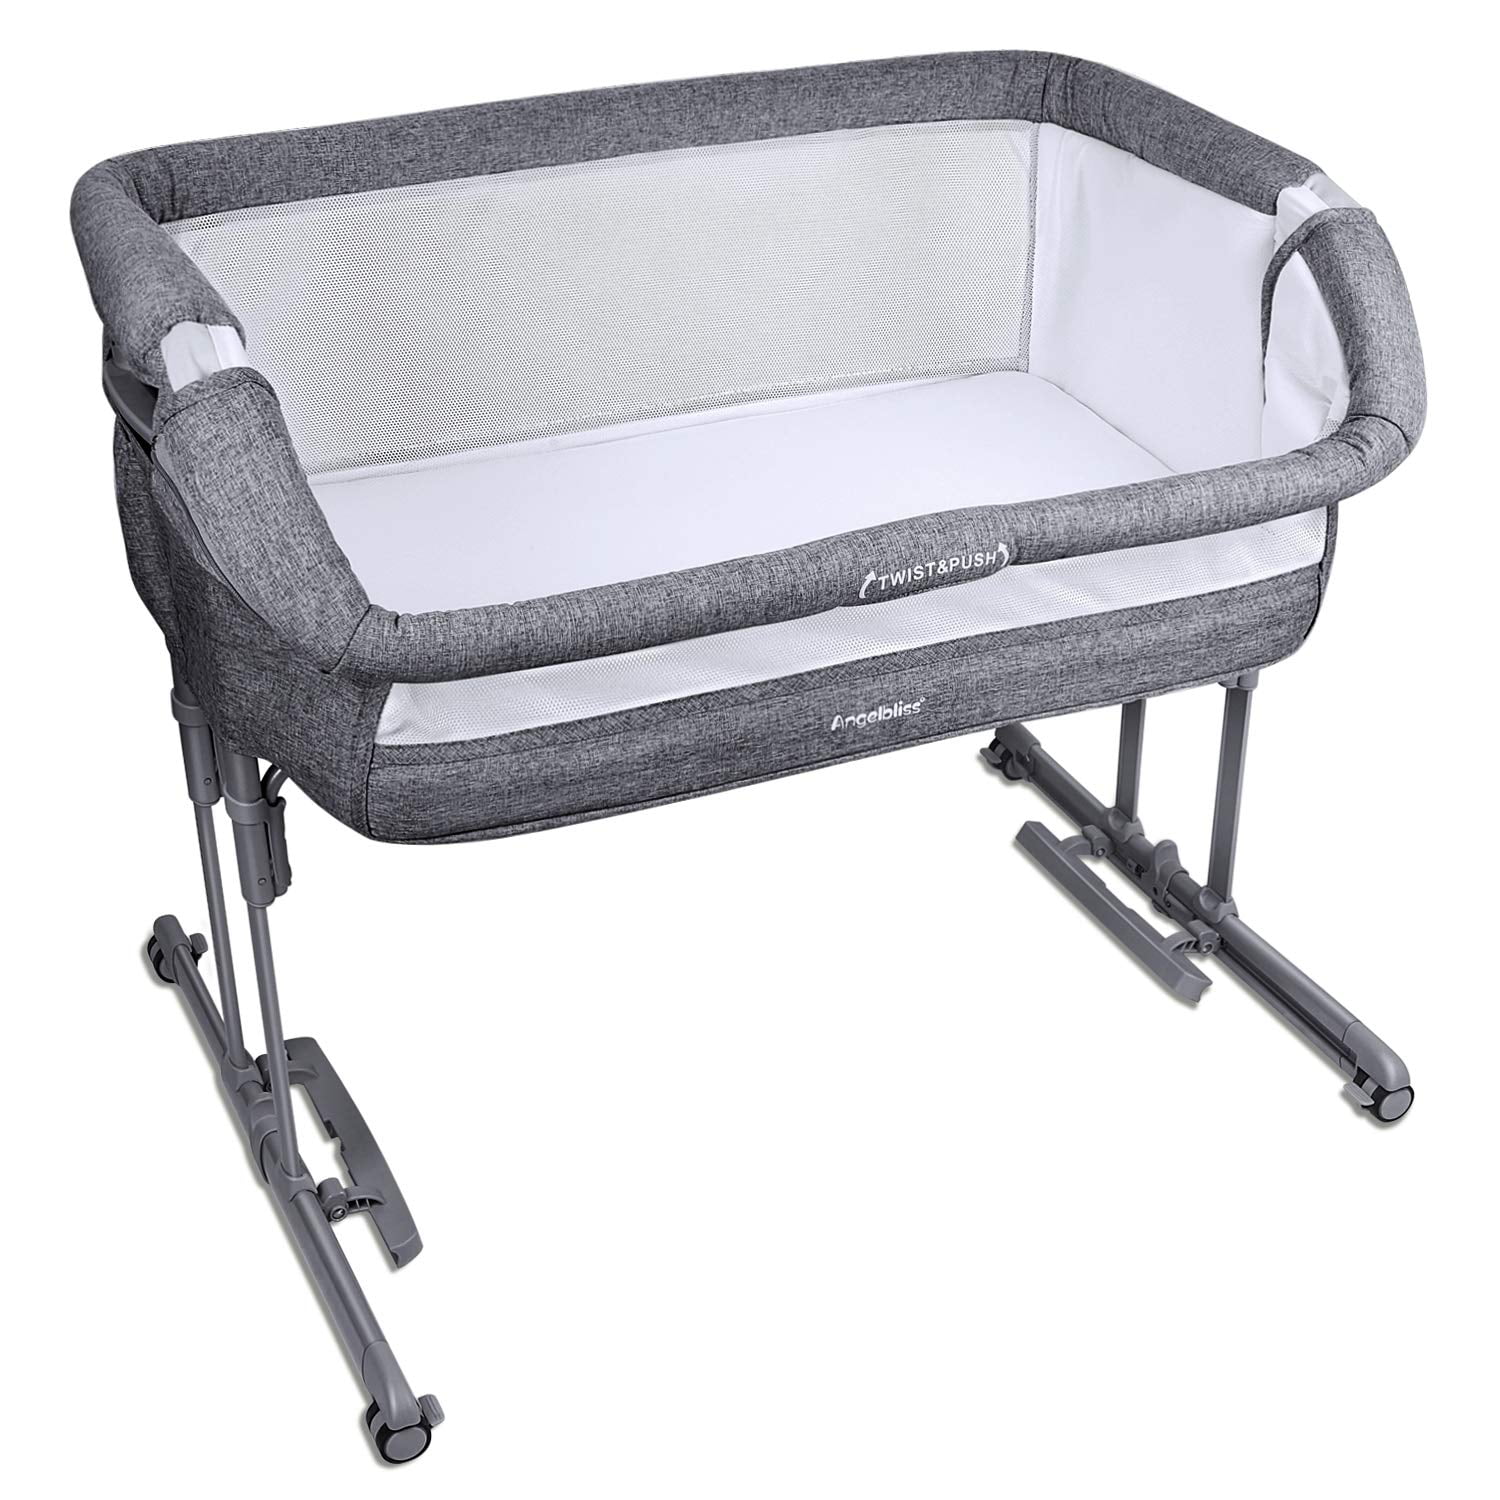 vocheer Baby Hammock Infant Bassinet for Bed Baby Lounger Bed Bassinet for Newborn Baby Portable Crib Suitable for 0-8 Months 